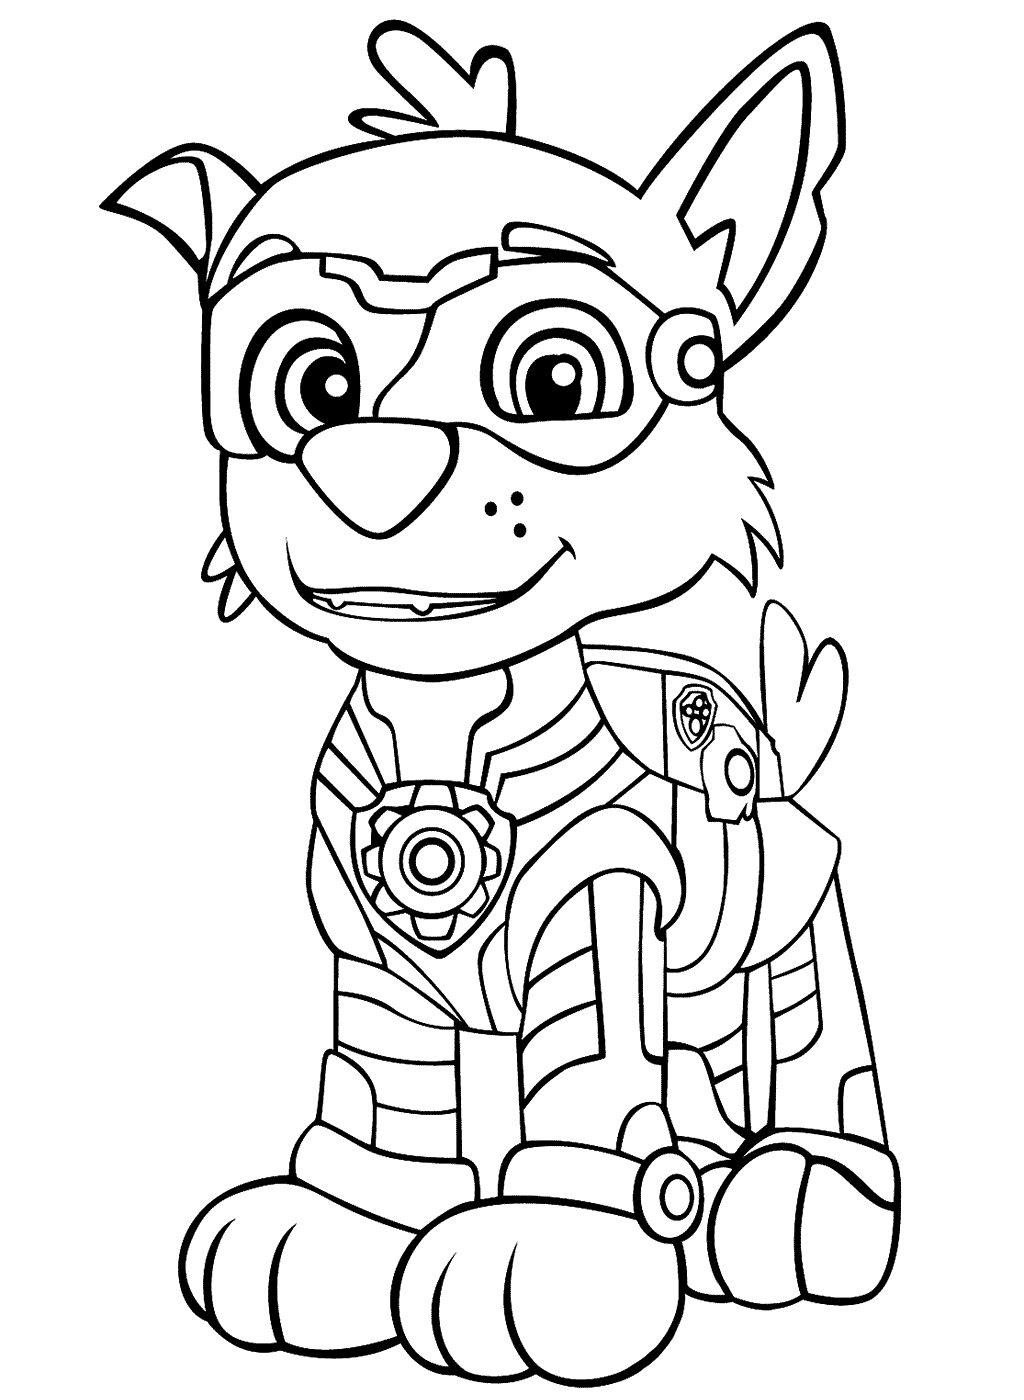 PAW Patrol Mighty Pups Rockys Coloring Page